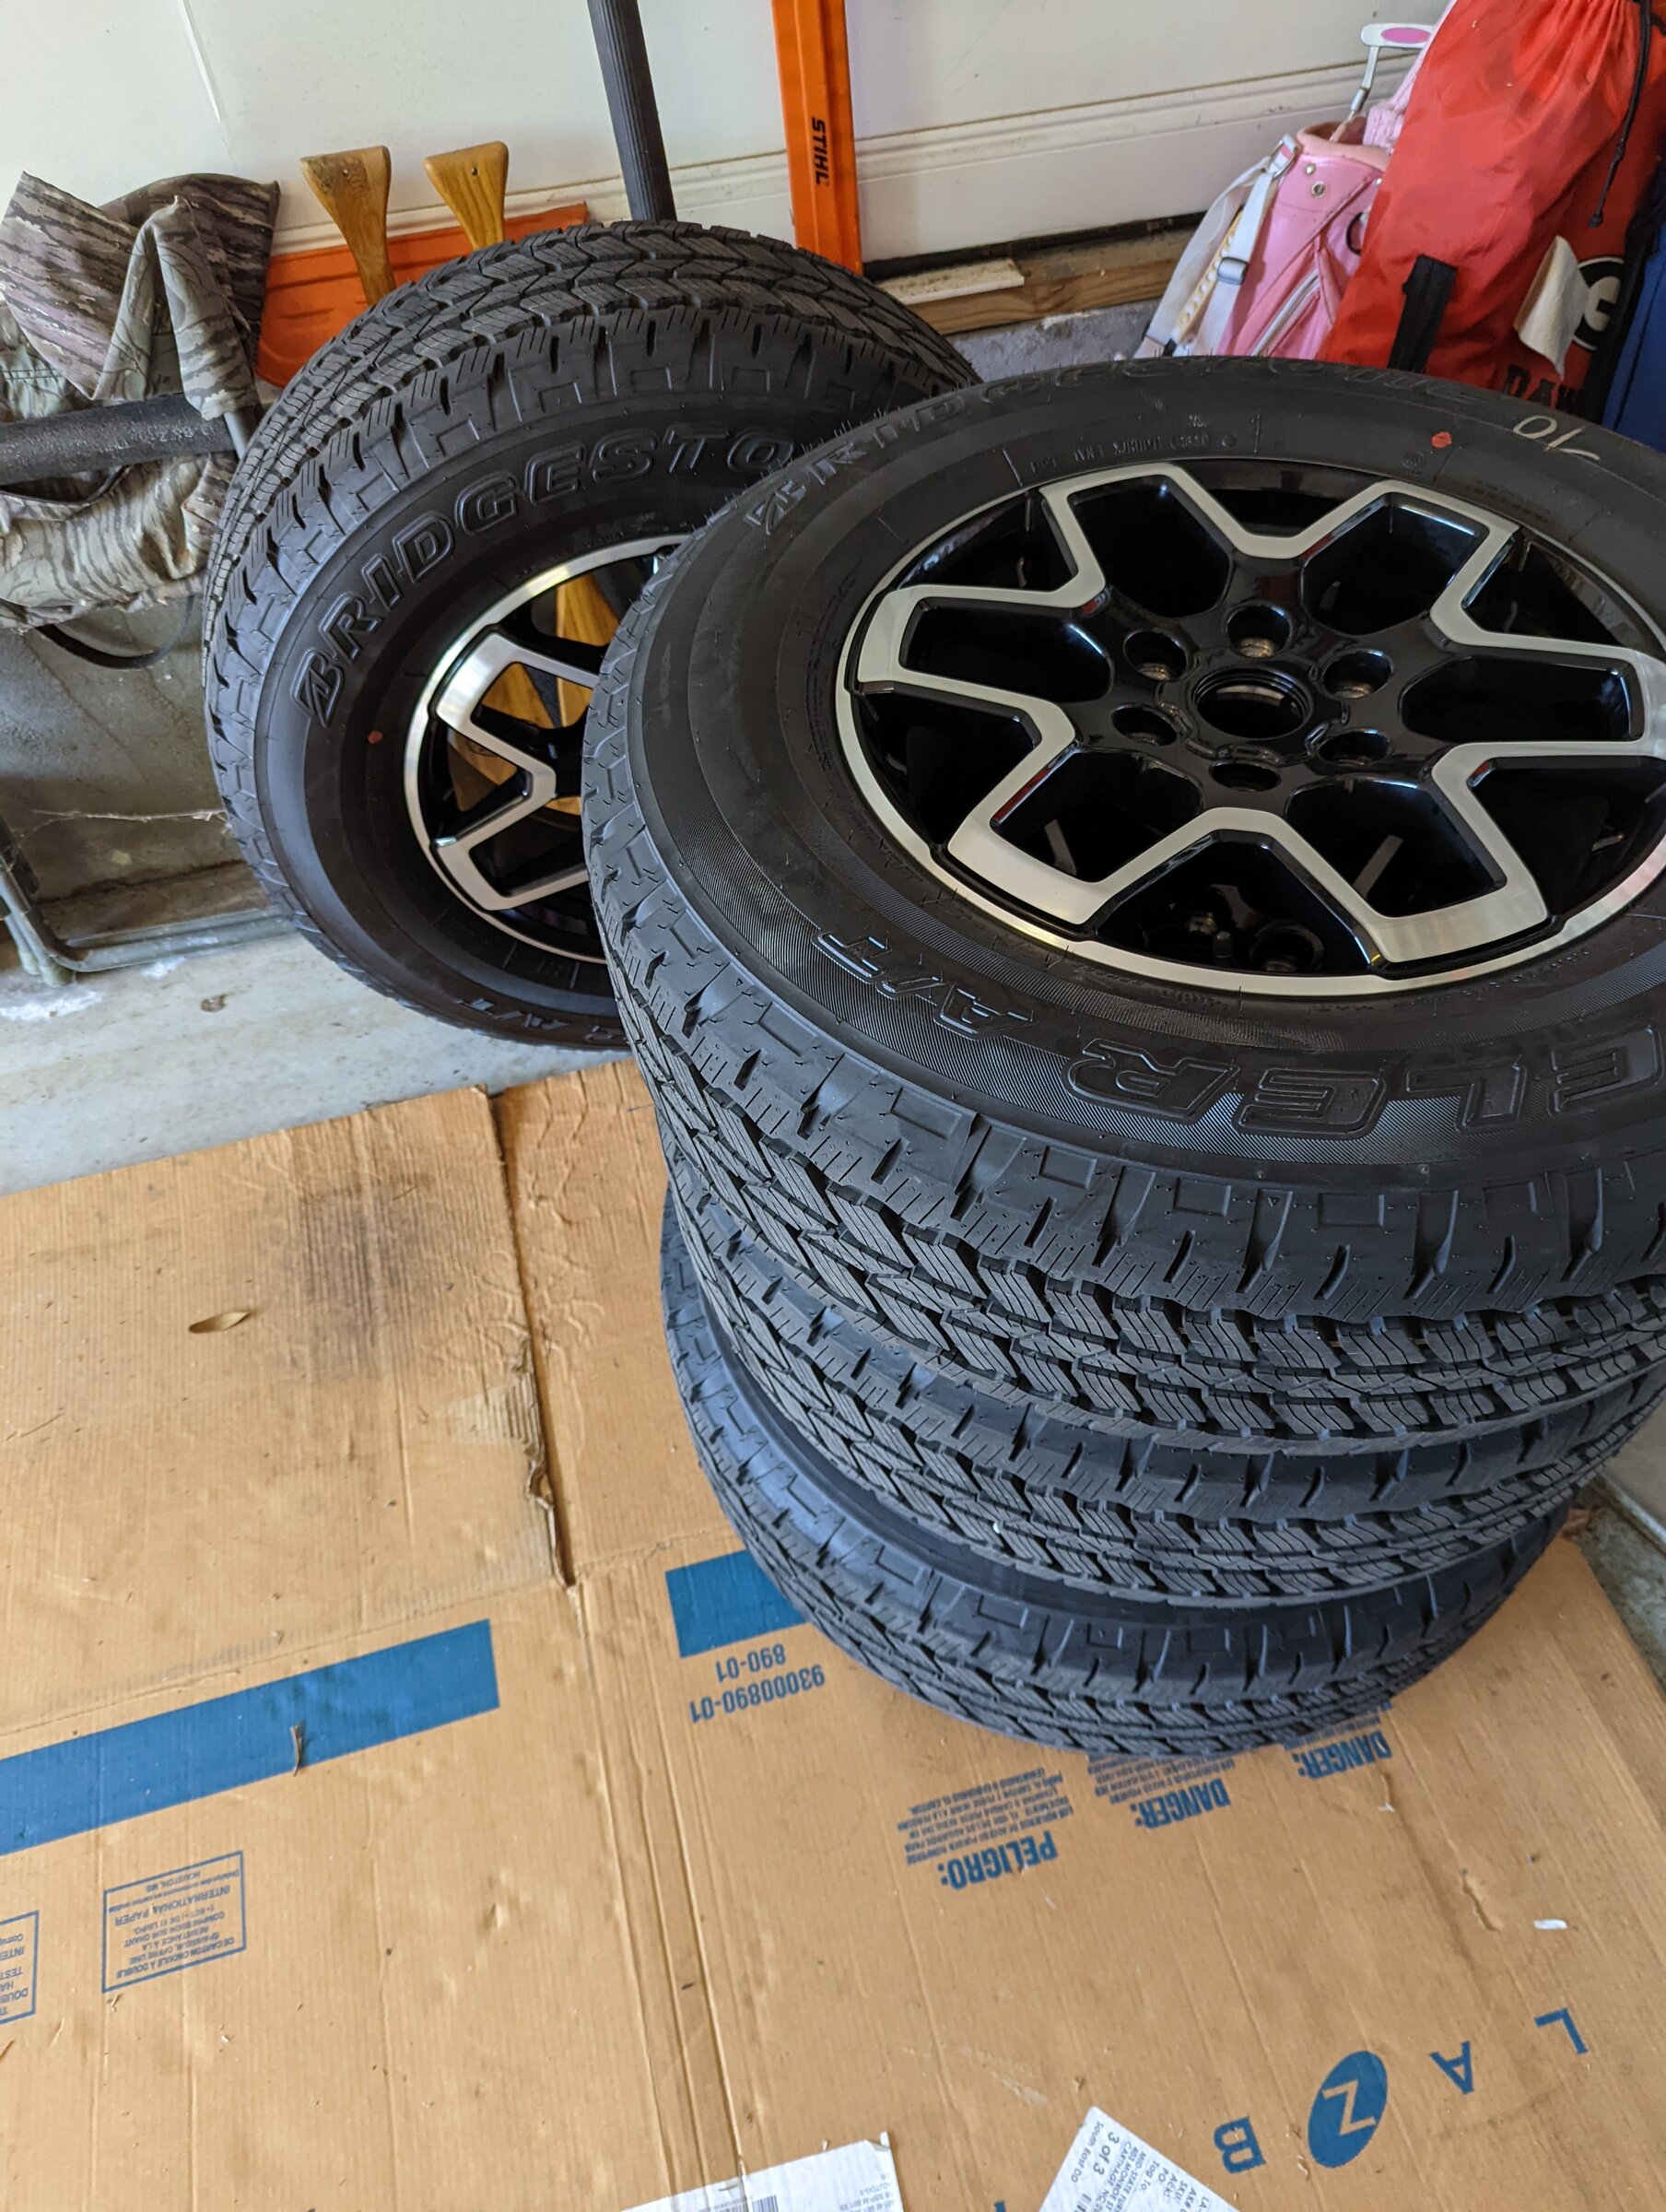 Ford Bronco Outer Banks wheels and tires For Sale Bridgestone Dueler 255/70R18 Tires PXL_20220419_213855711